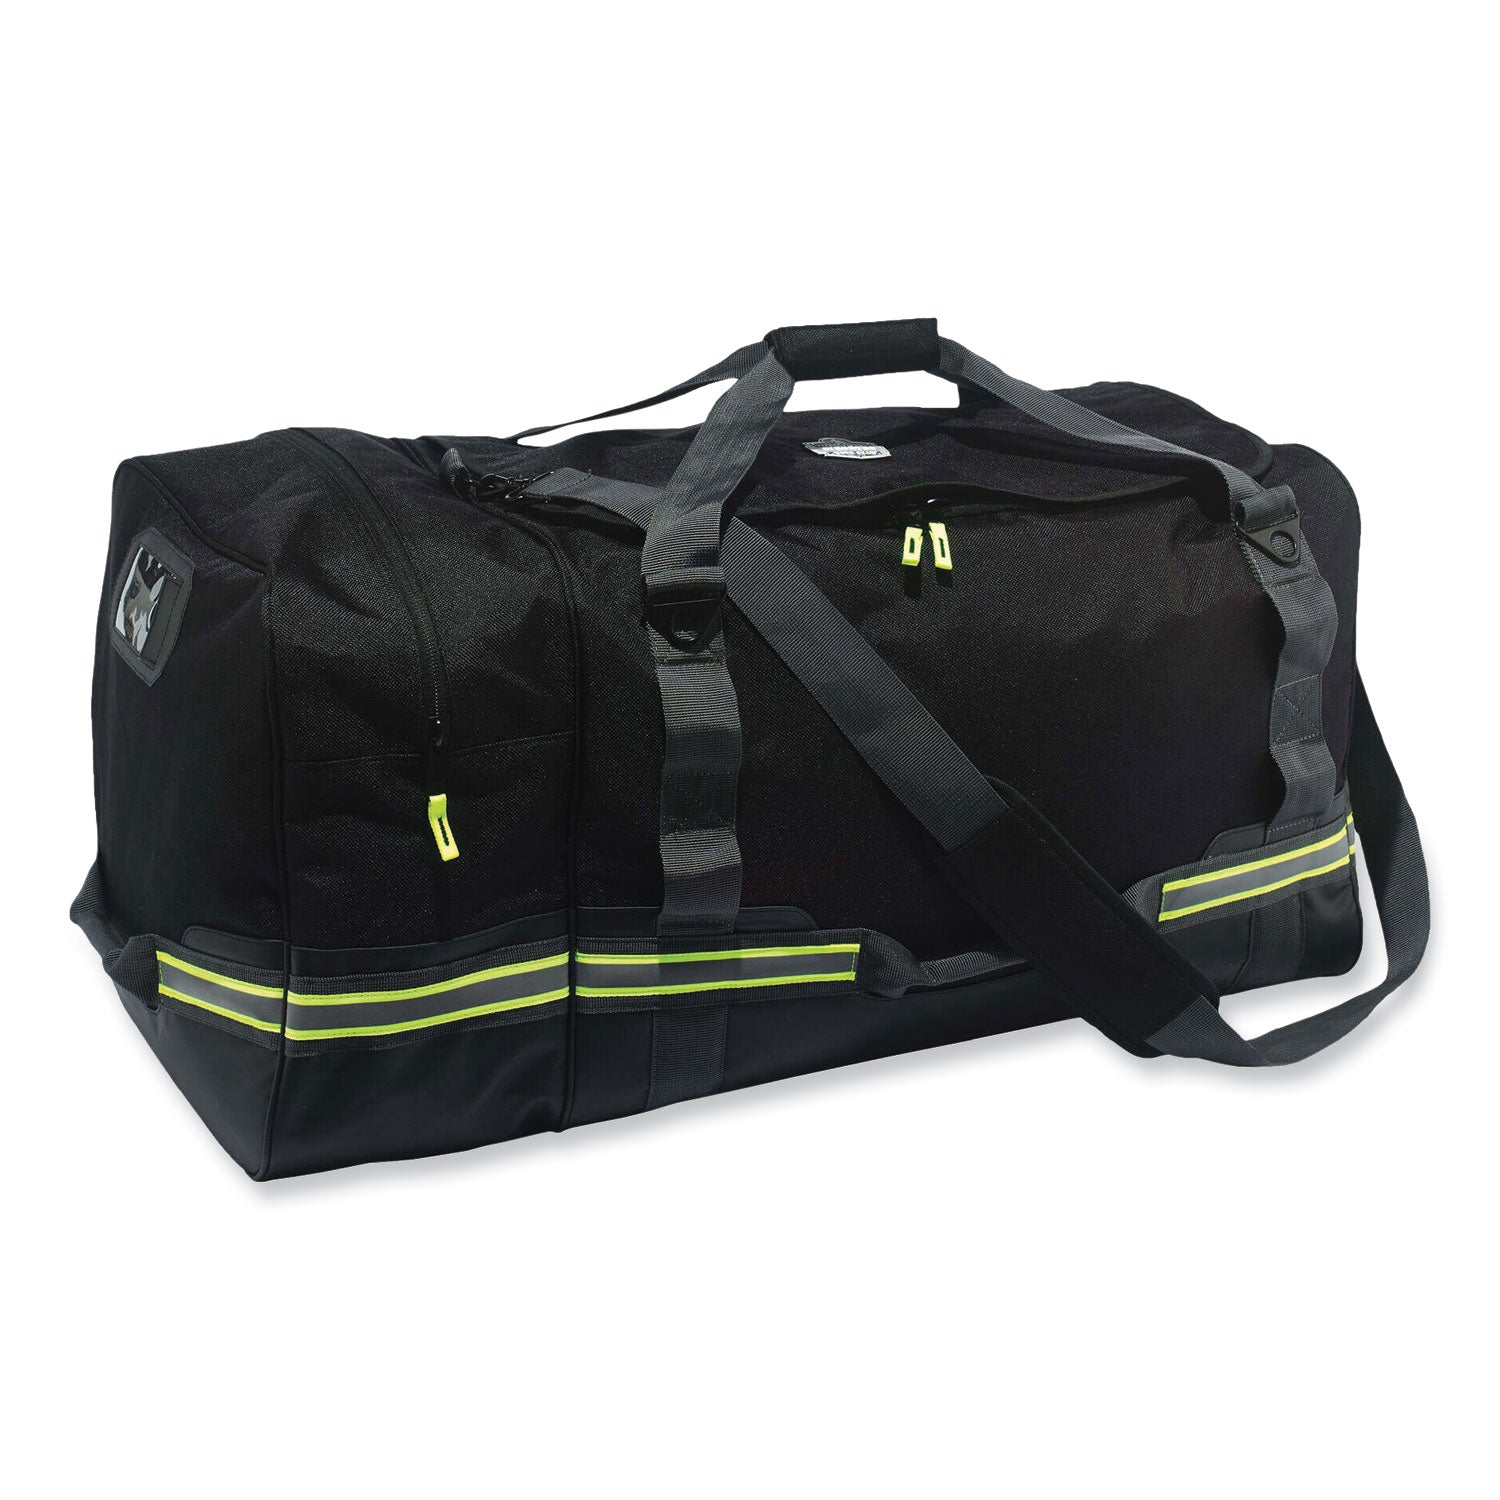 arsenal-5008-fire-+-safety-gear-bag-16-x-31-x-155-black-ships-in-1-3-business-days_ego13009 - 1